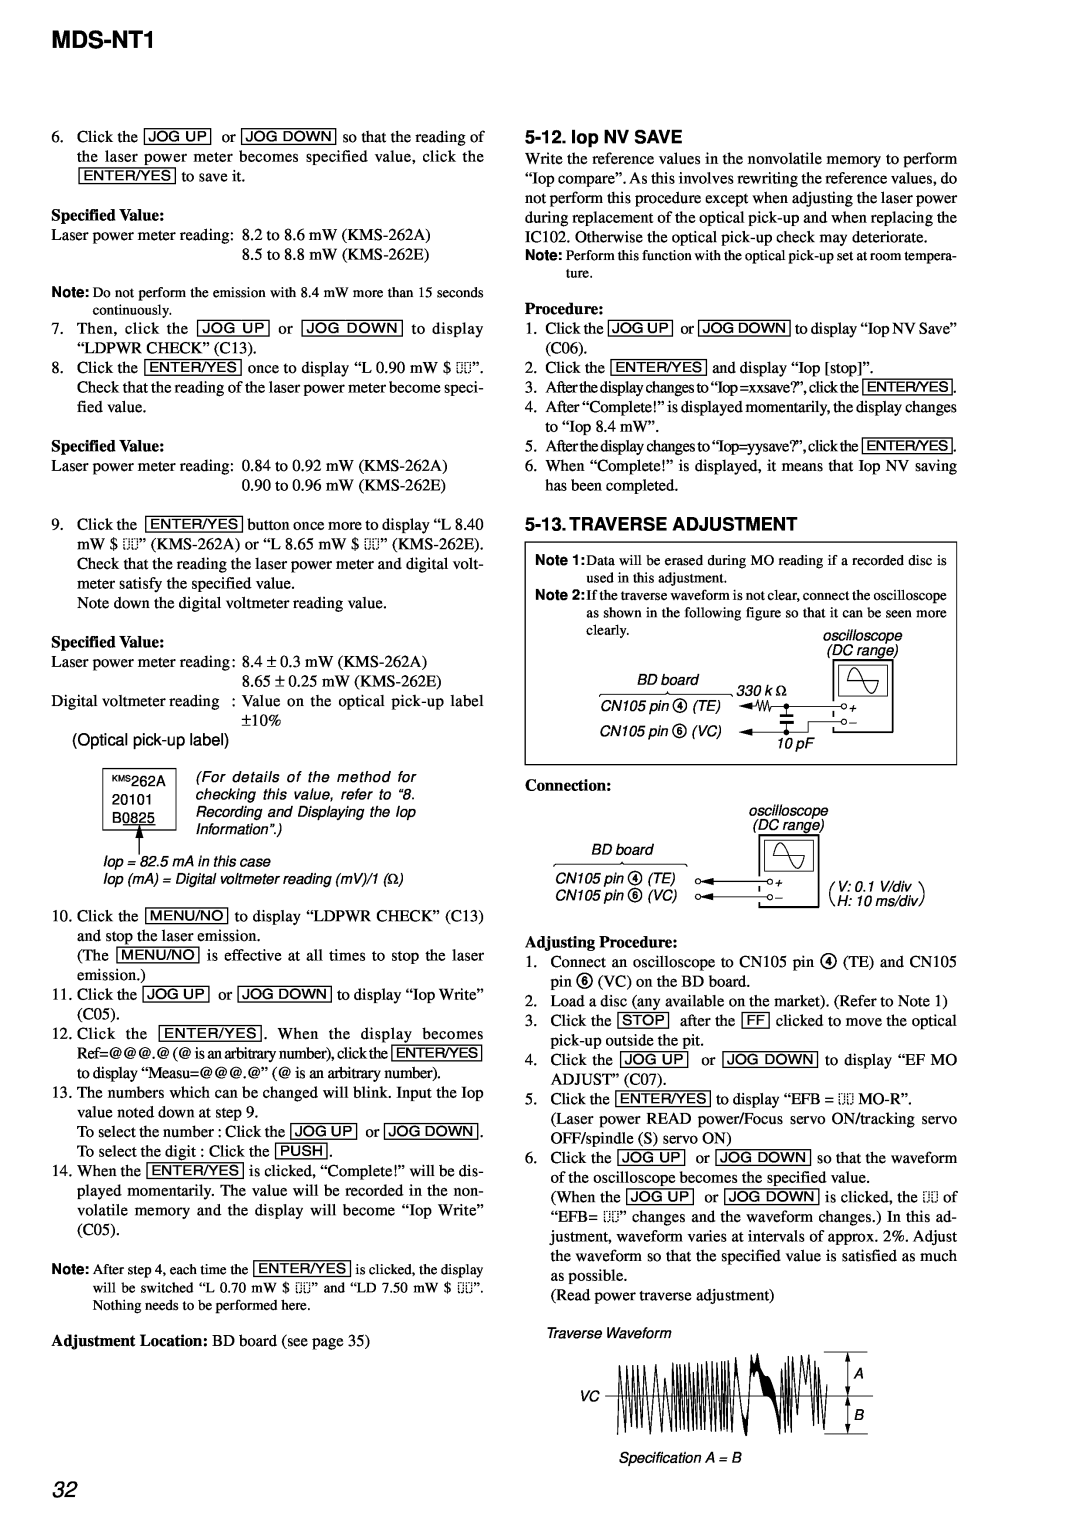 Sony MDS-NT1 service manual ENTER/YES to save it, Iop NV SAVE, Traverse Adjustment, Specified Value, Procedure, Connection 